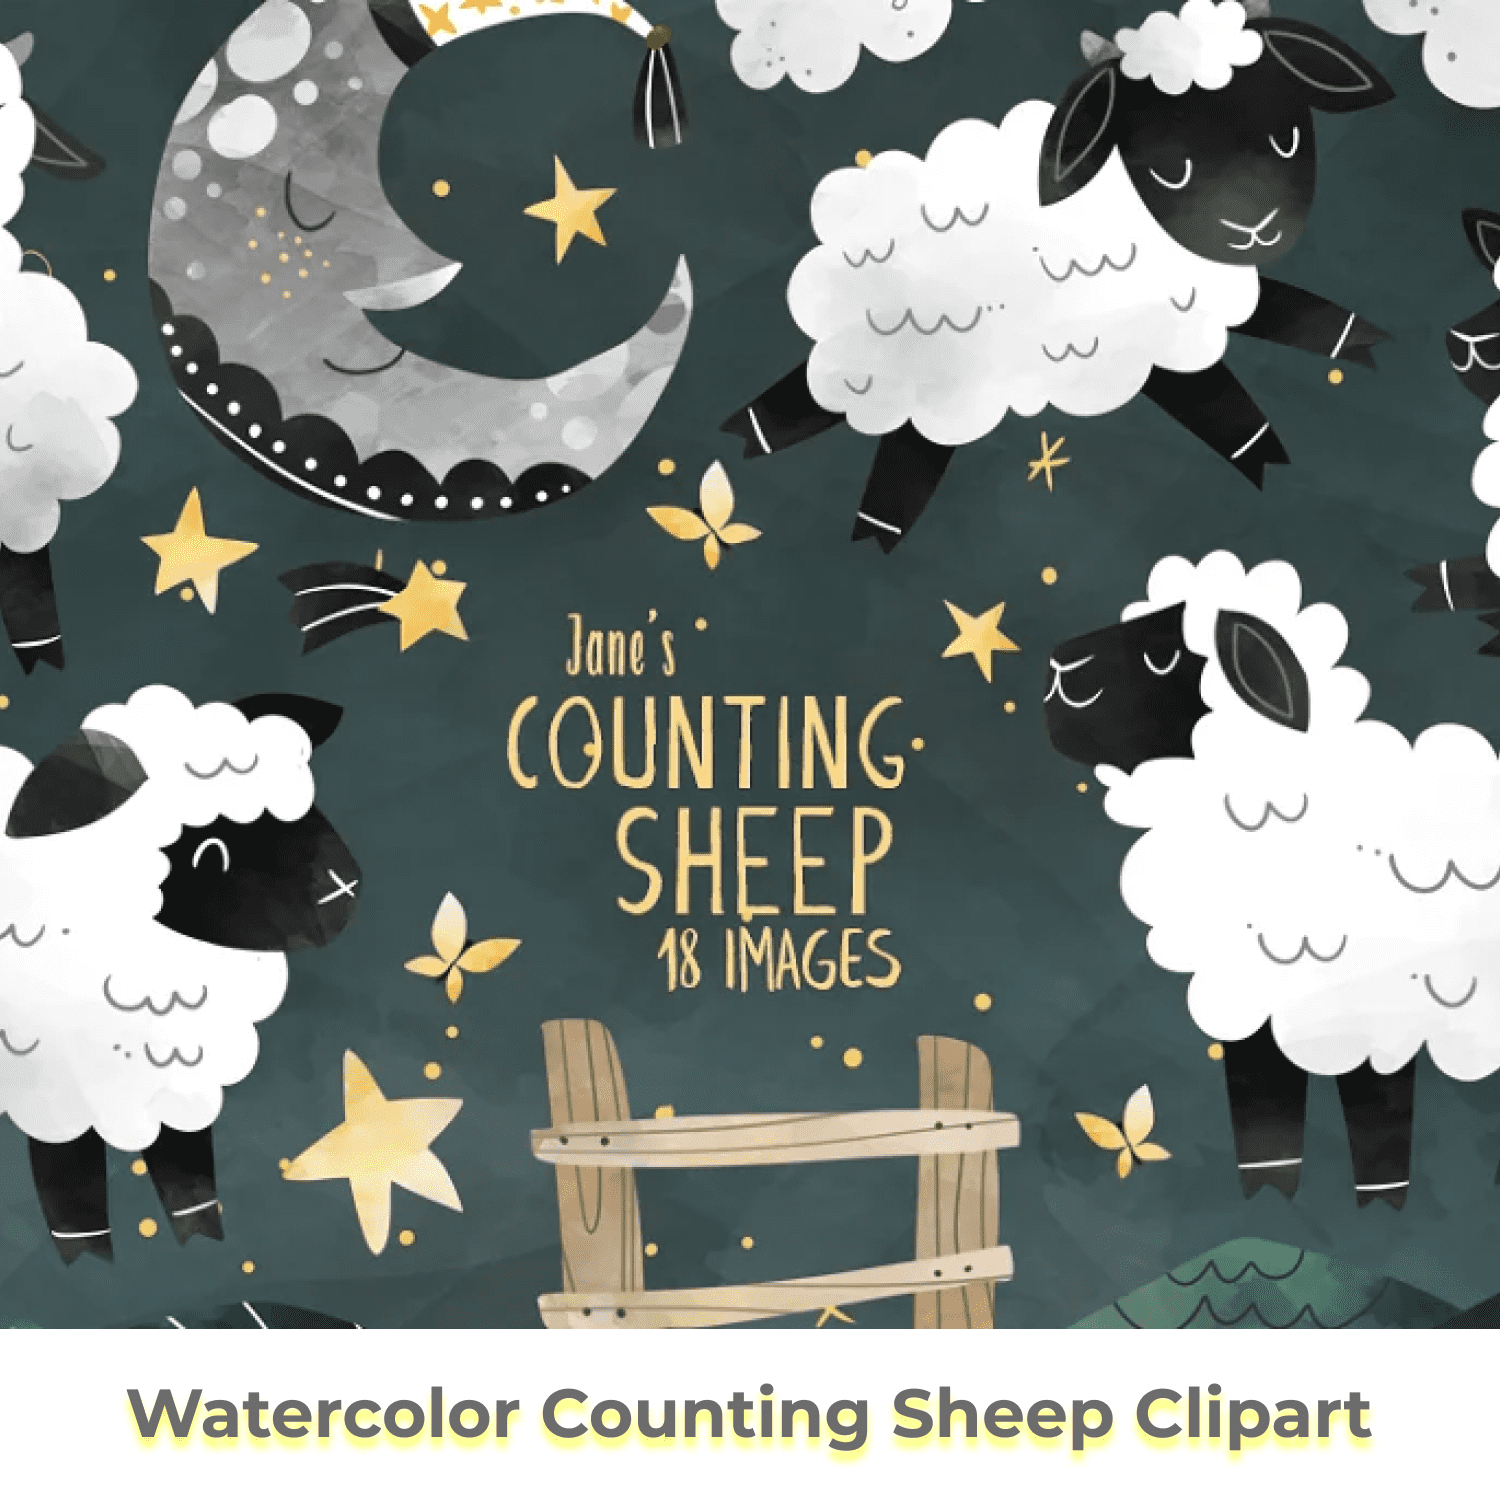 Watercolor Counting Sheep Clipart cover.